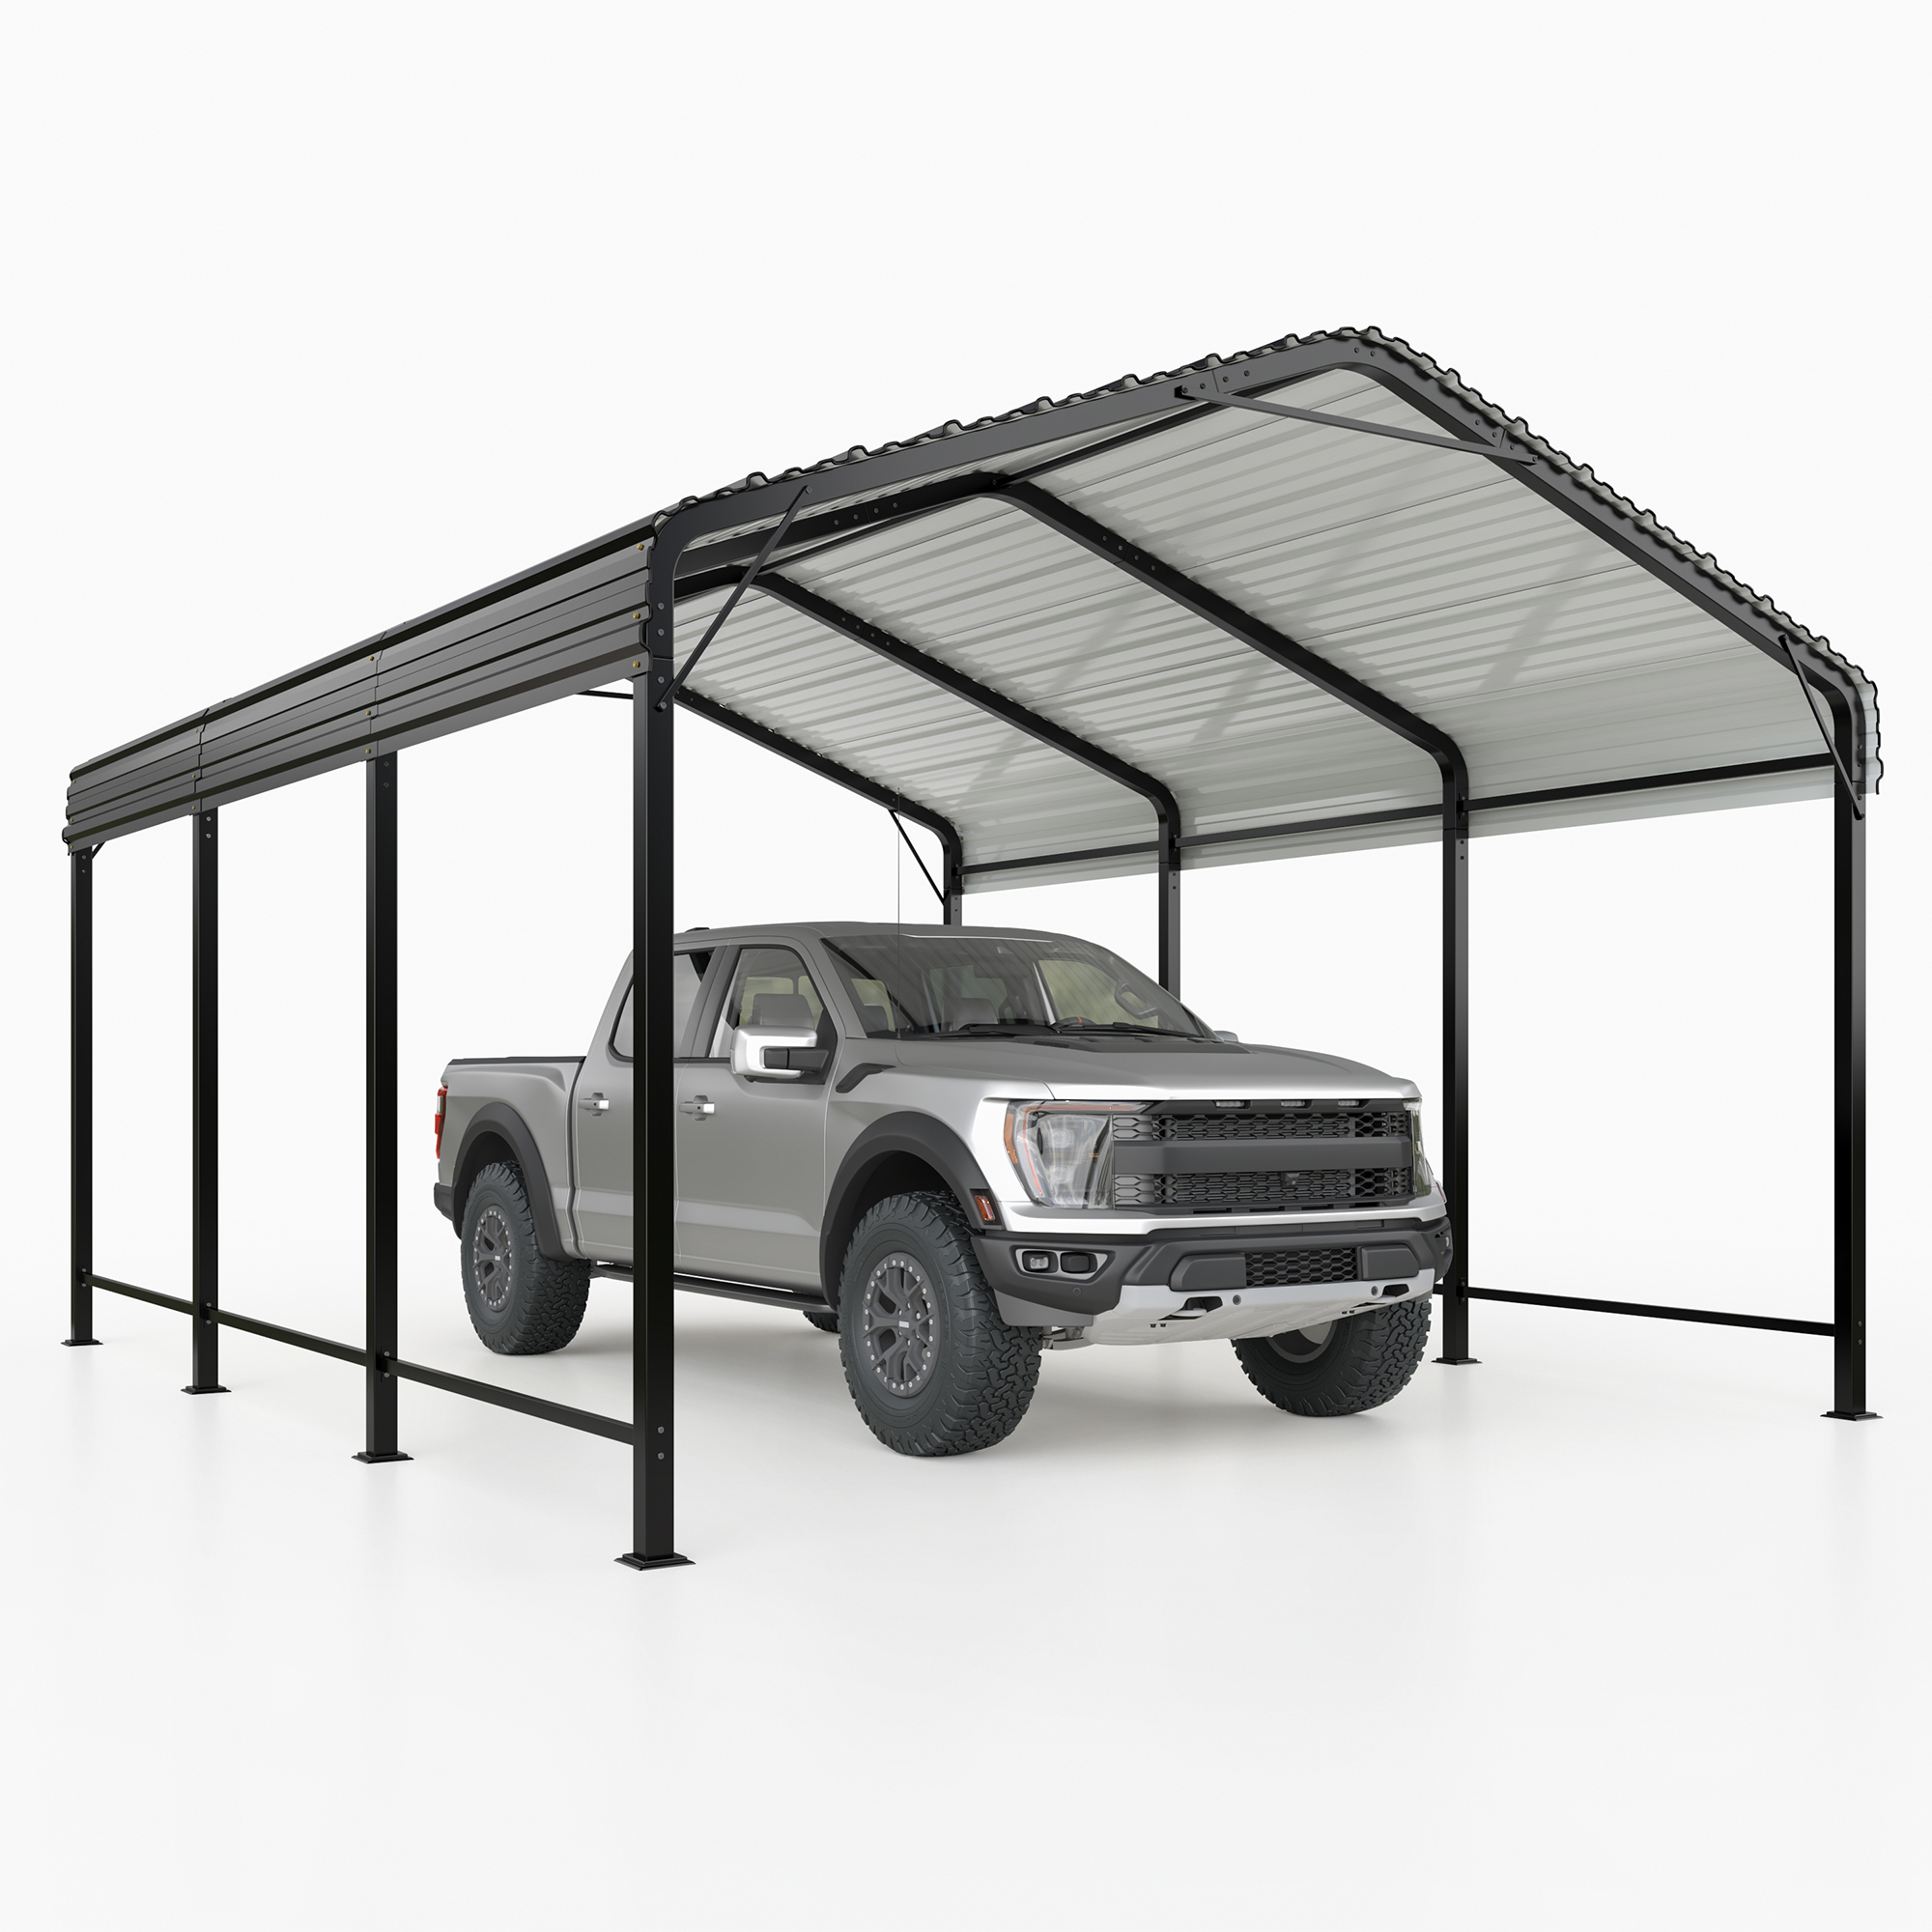 

Polar Aurora 10x15 Ft Metal Carport With Reinforced Base, Heavy-duty Outdoor Garage, Galvanized Car Shelter Suitable For Cars, Boats, And Trucks